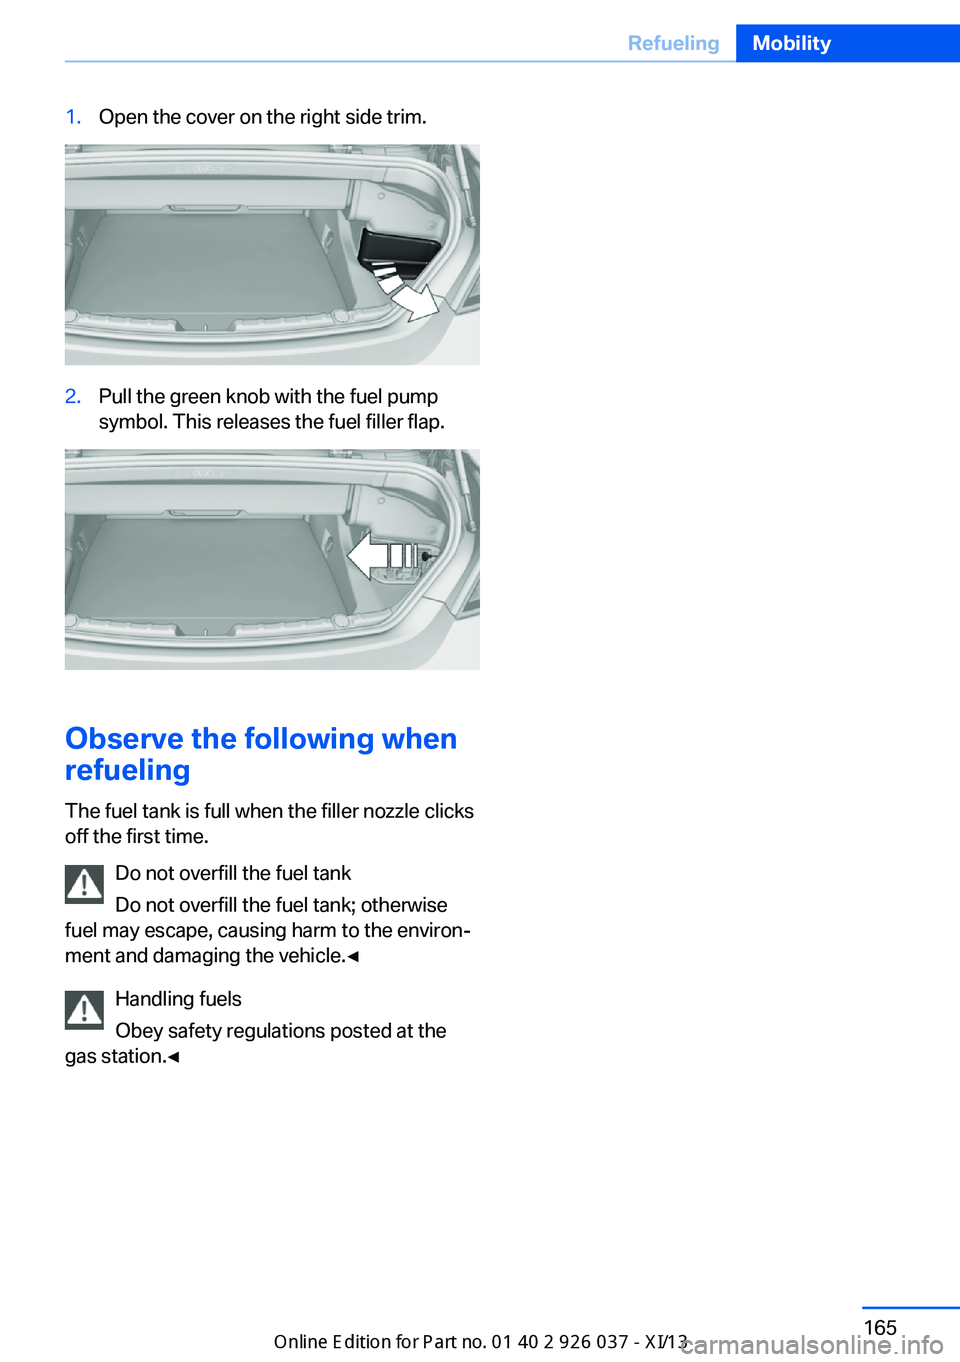 BMW M6 CONVERTIBLE 2013 F12 Owners Manual 1.Open the cover on the right side trim.2.Pull the green knob with the fuel pump
symbol. This releases the fuel filler flap.
Observe the following when
refueling
The fuel tank is full when the filler 